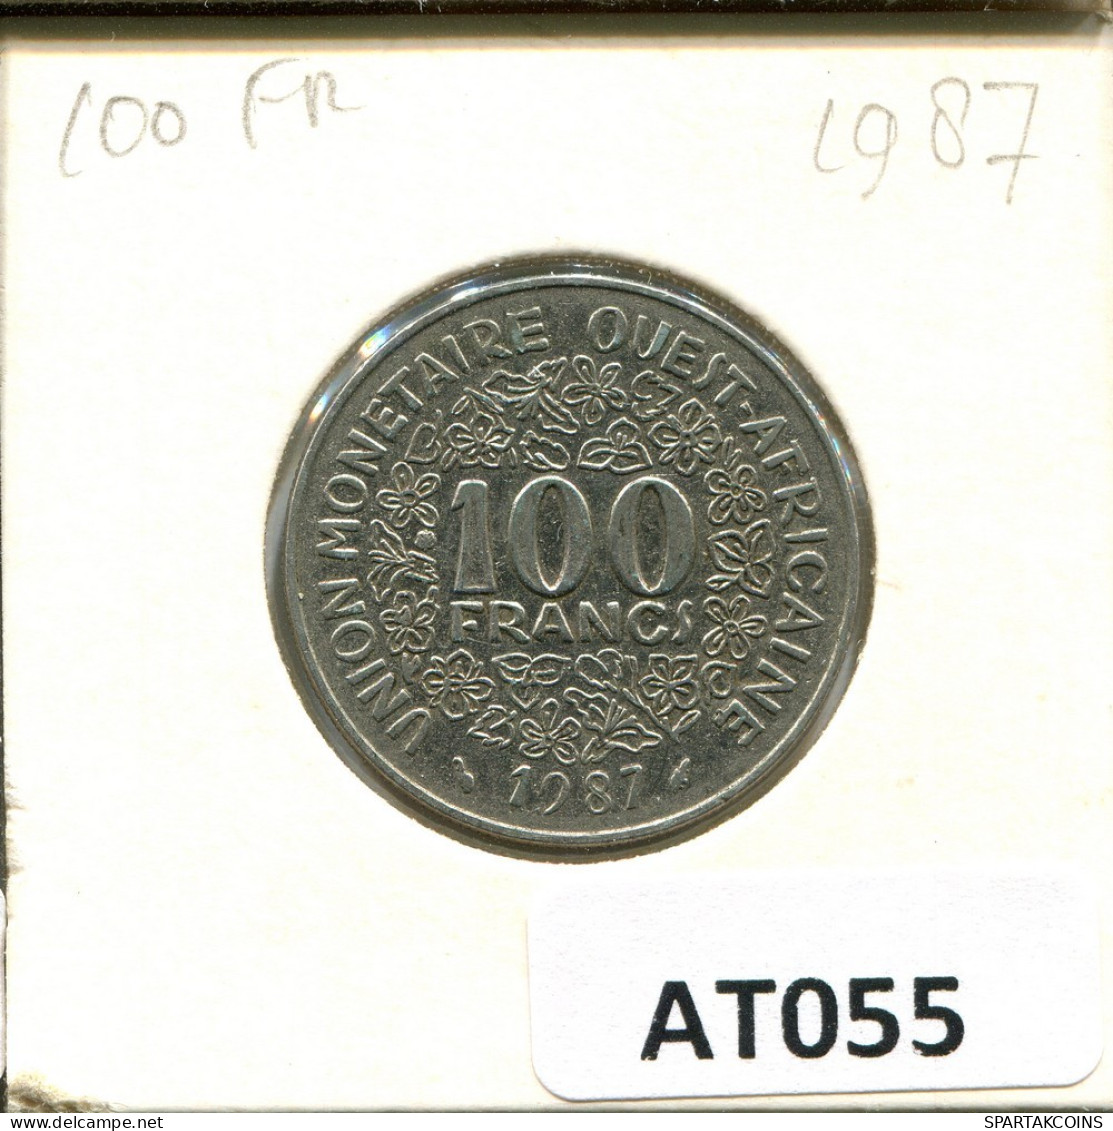 100 FRANCS CFA 1987 Western African States (BCEAO) Coin #AT055.U.A - Other - Africa